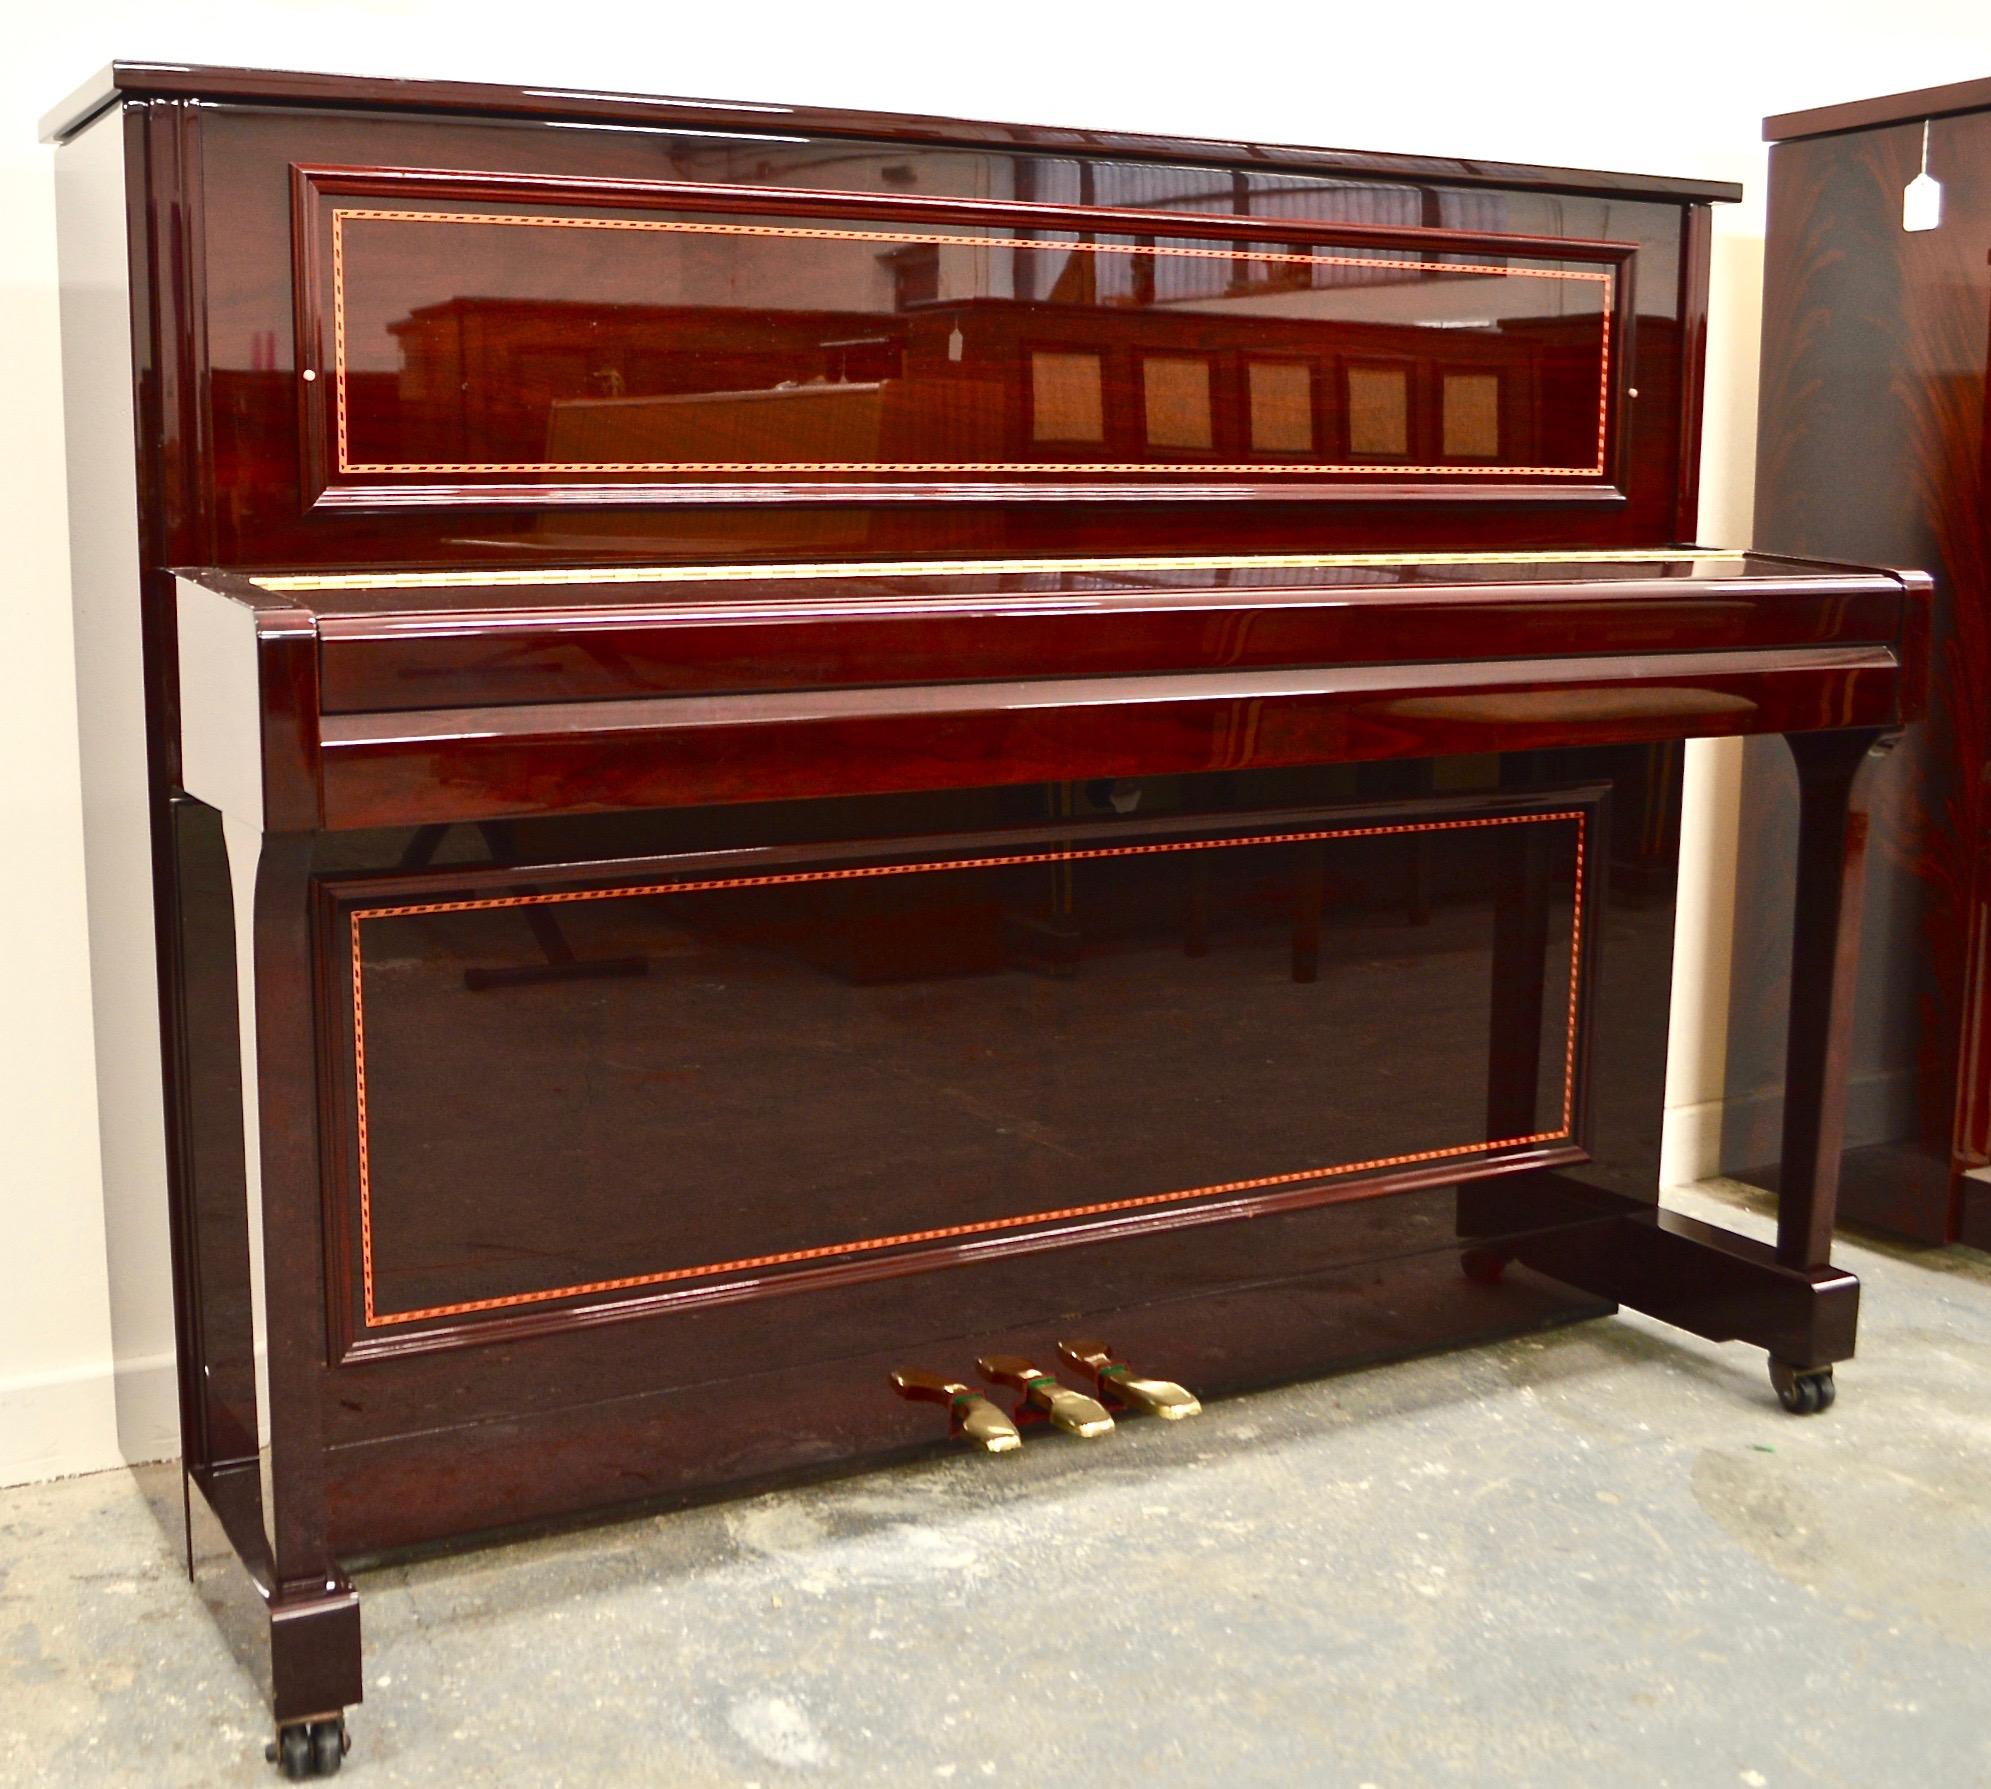 This traditional style piano has been designed in Germany by Klaus Fenner and then manufactured by Korean company Samick. Samick are a Korean piano maker that produce pianos to a high standard using production methods similar to that of Yamaha and